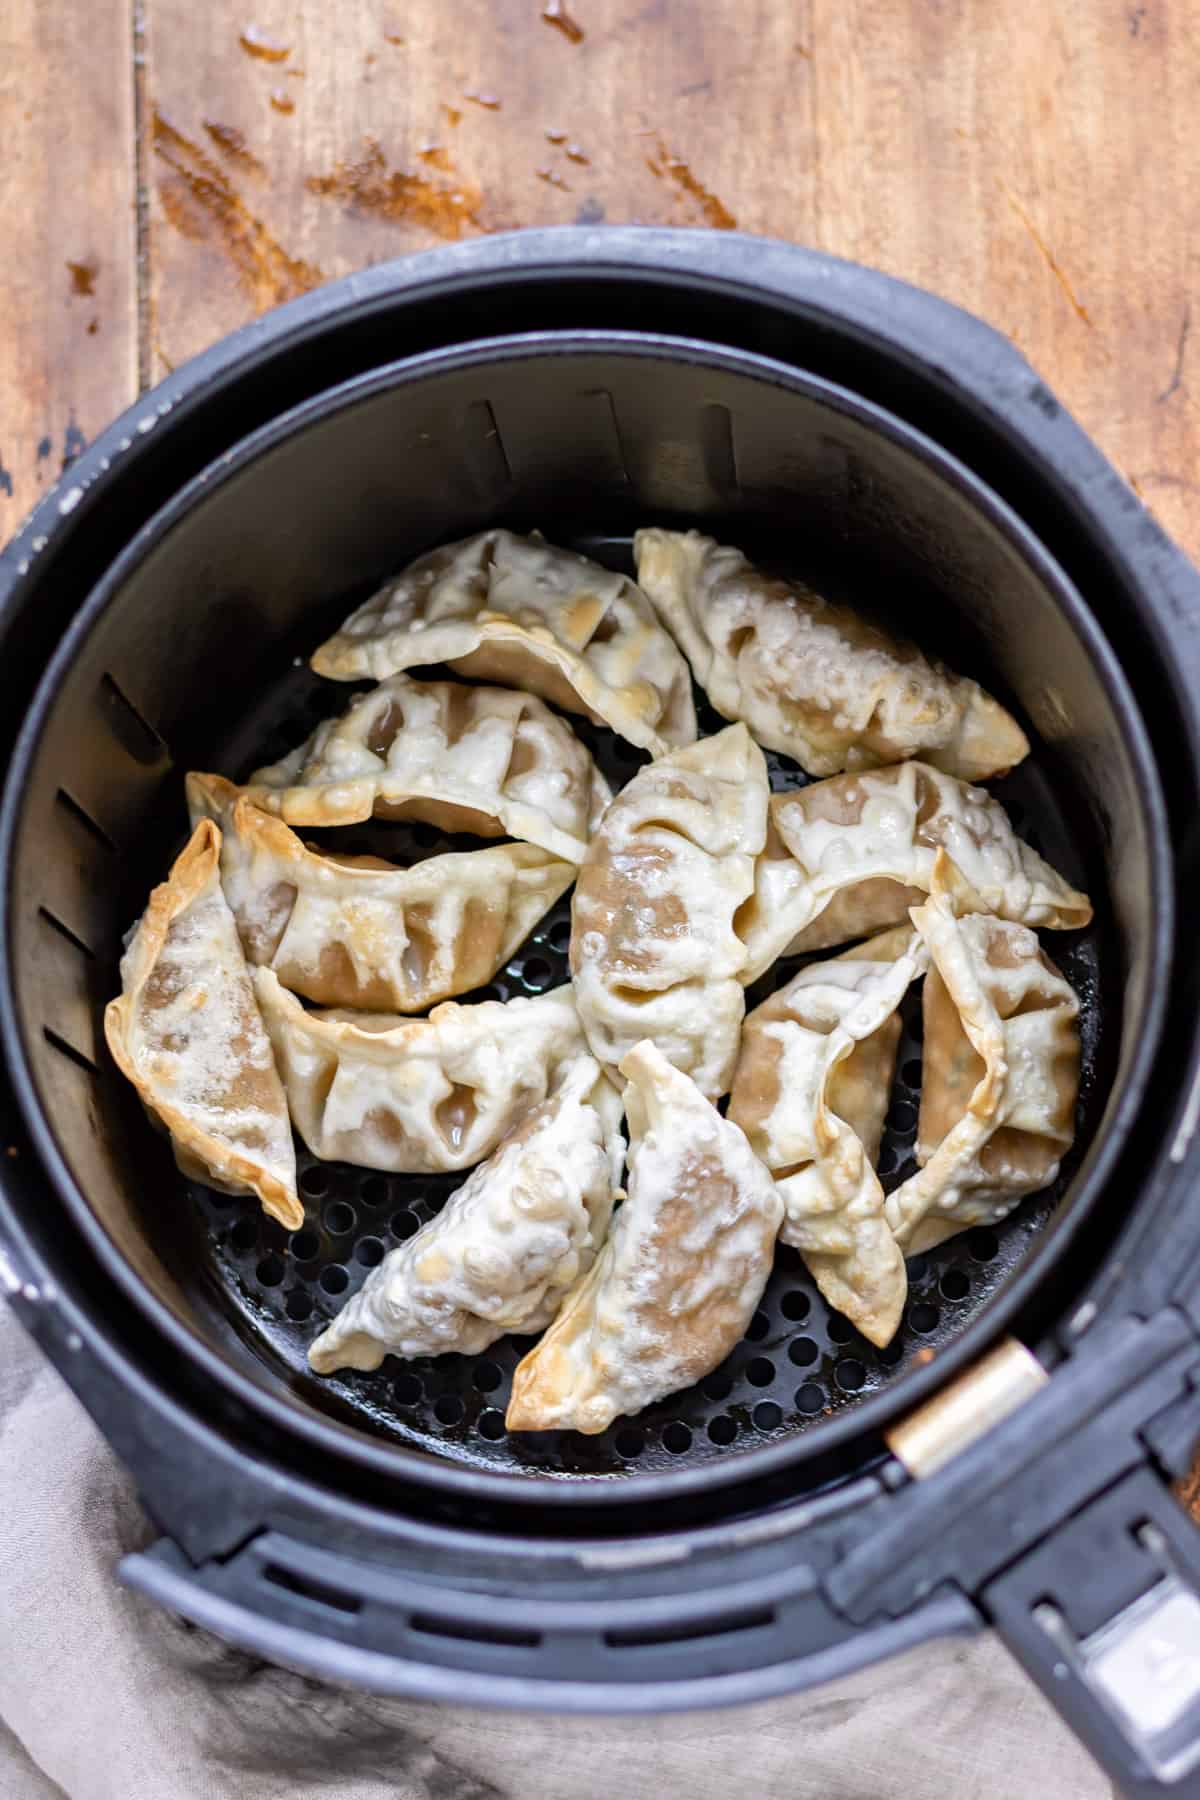 Partially cooked potstickers in air fryer.